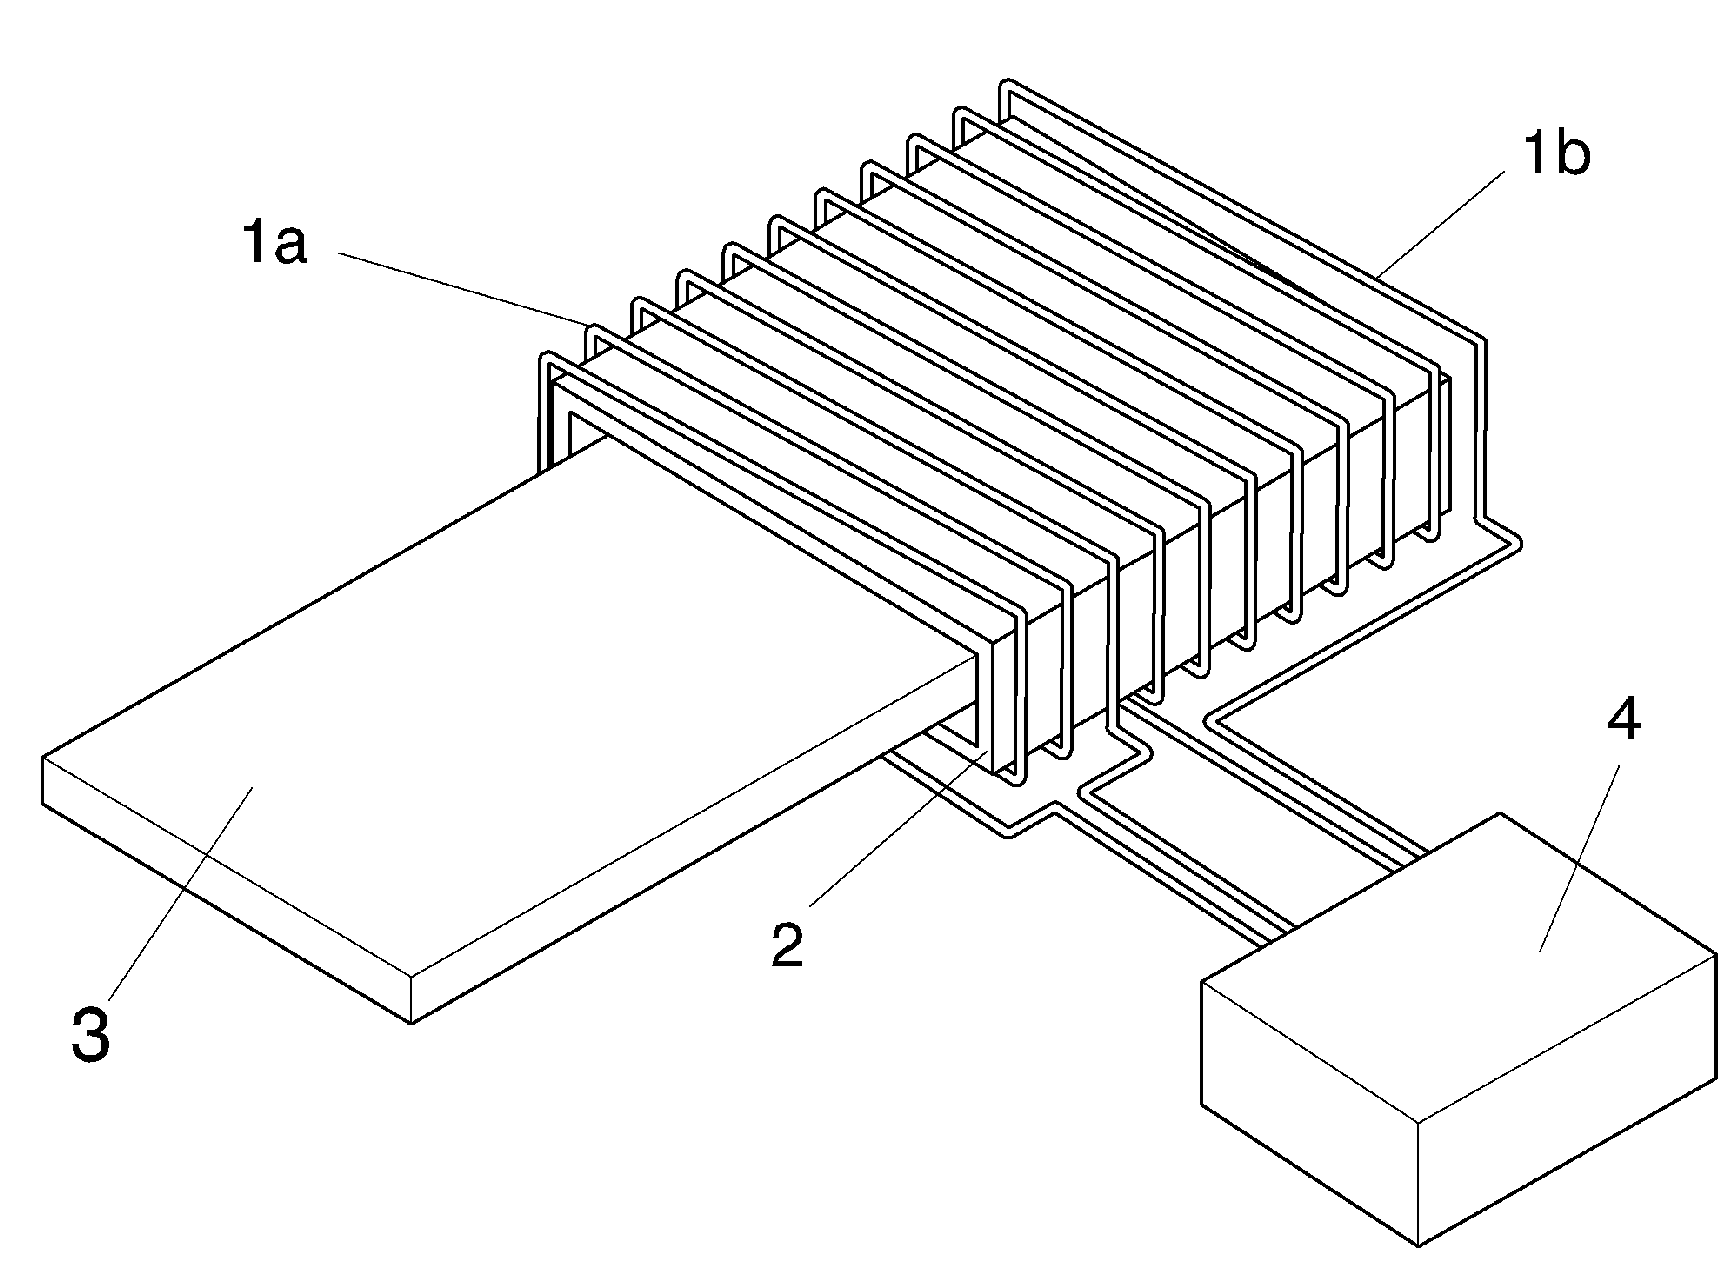 Method and device for disassembling electrical-electronic apparatuses